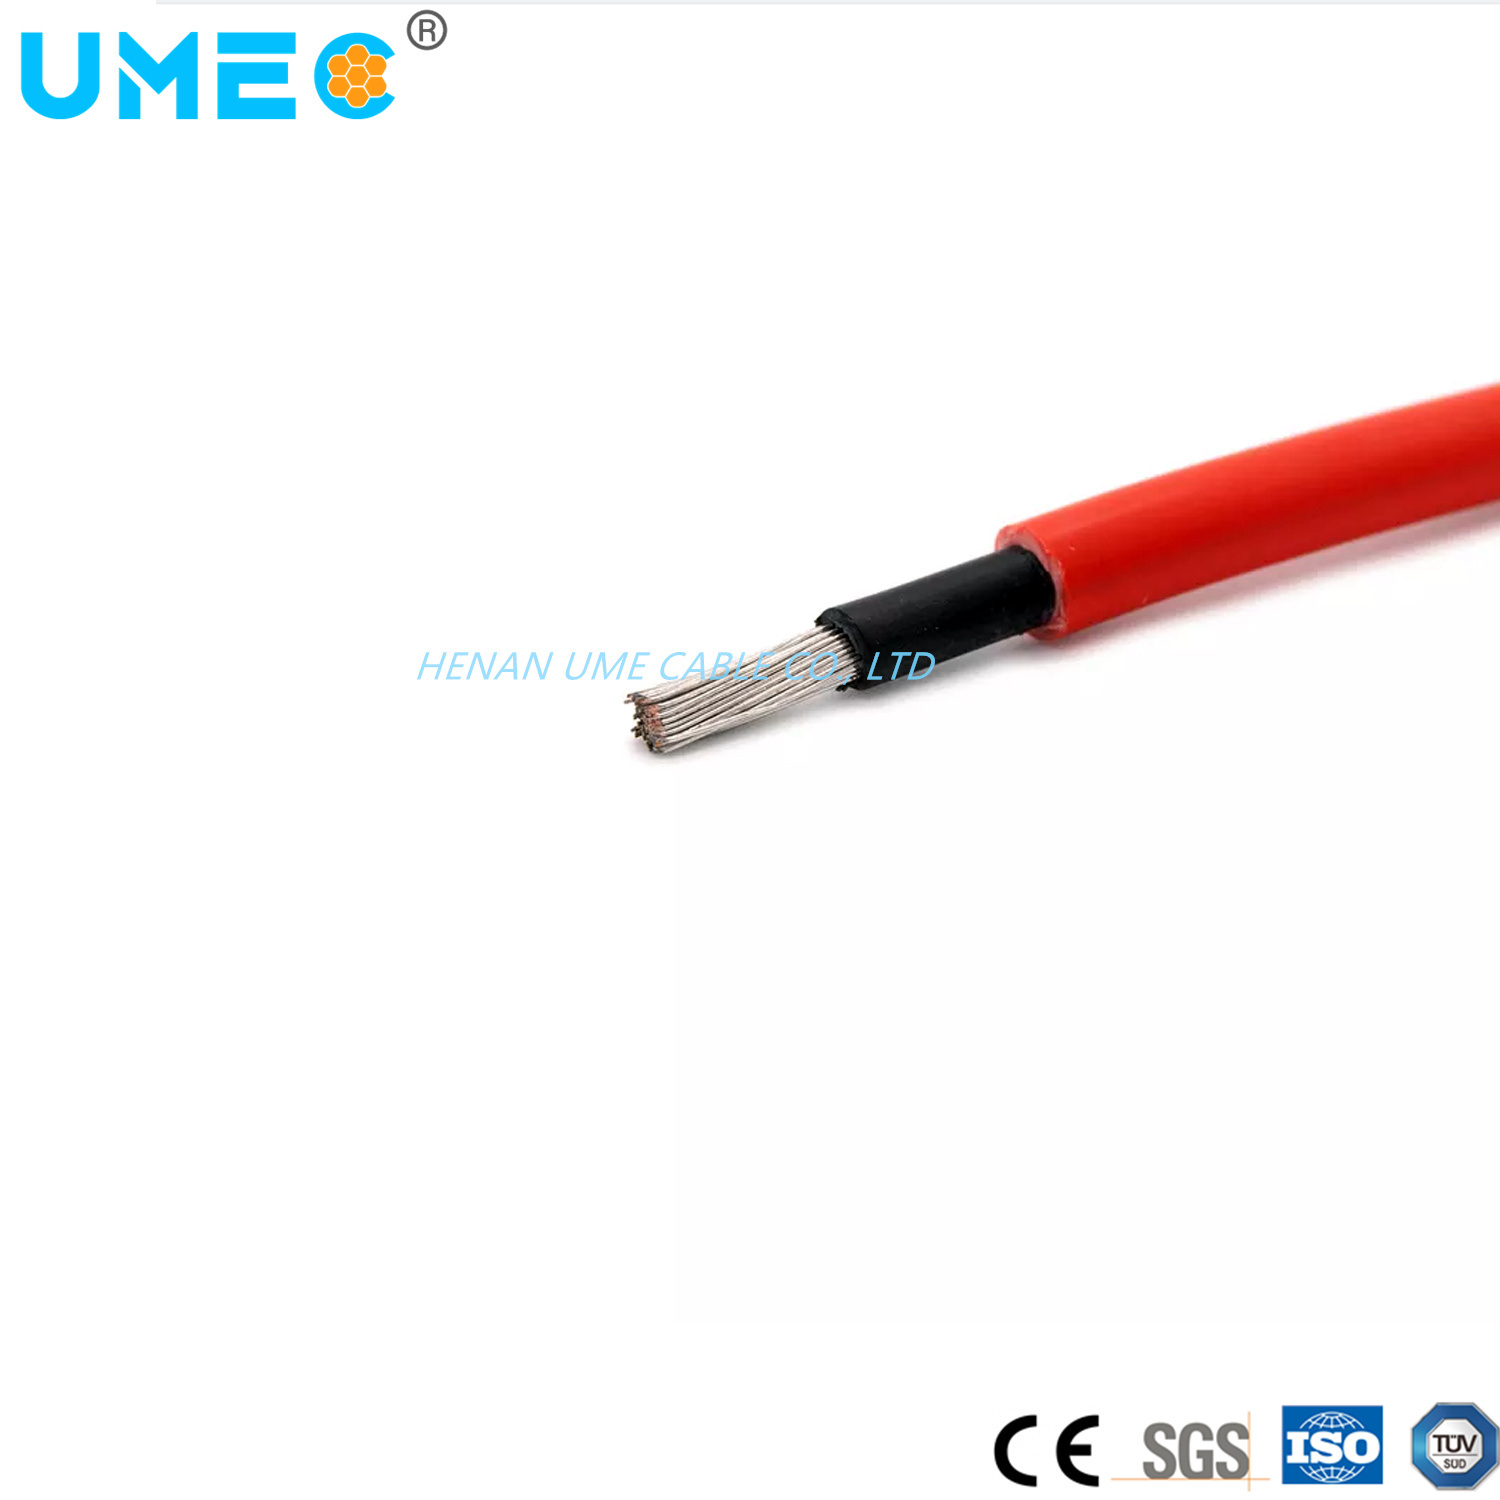 Solar Photovoltaic Cable UV Resistant 2.5mm/14AWG Hffr/ Xlpo/ Halogen-Free Insulated Jacket